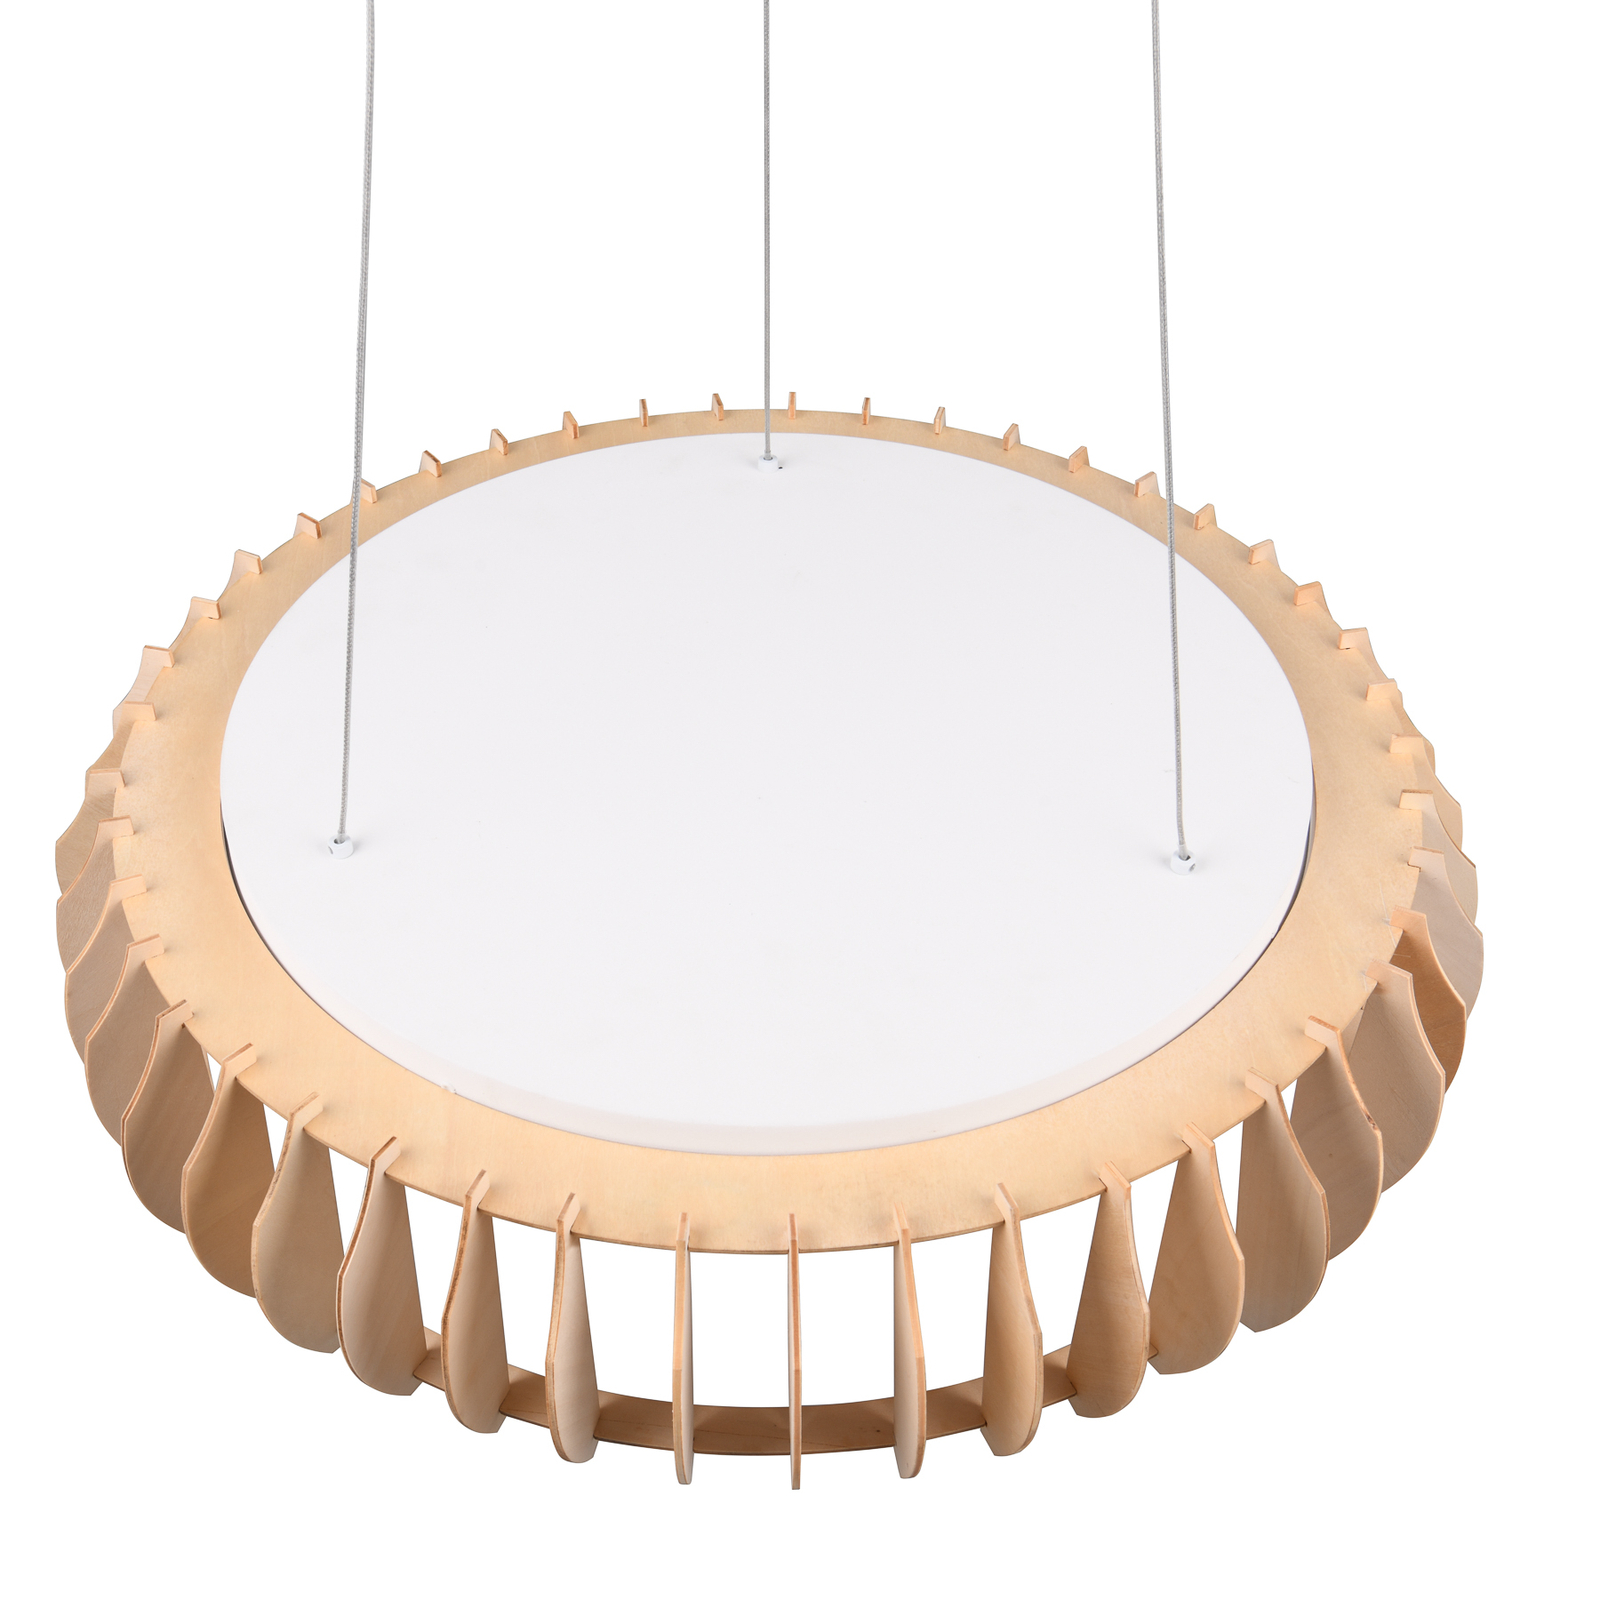 Monte LED hanglamp, Ø 60 cm, licht hout, hout, CCT